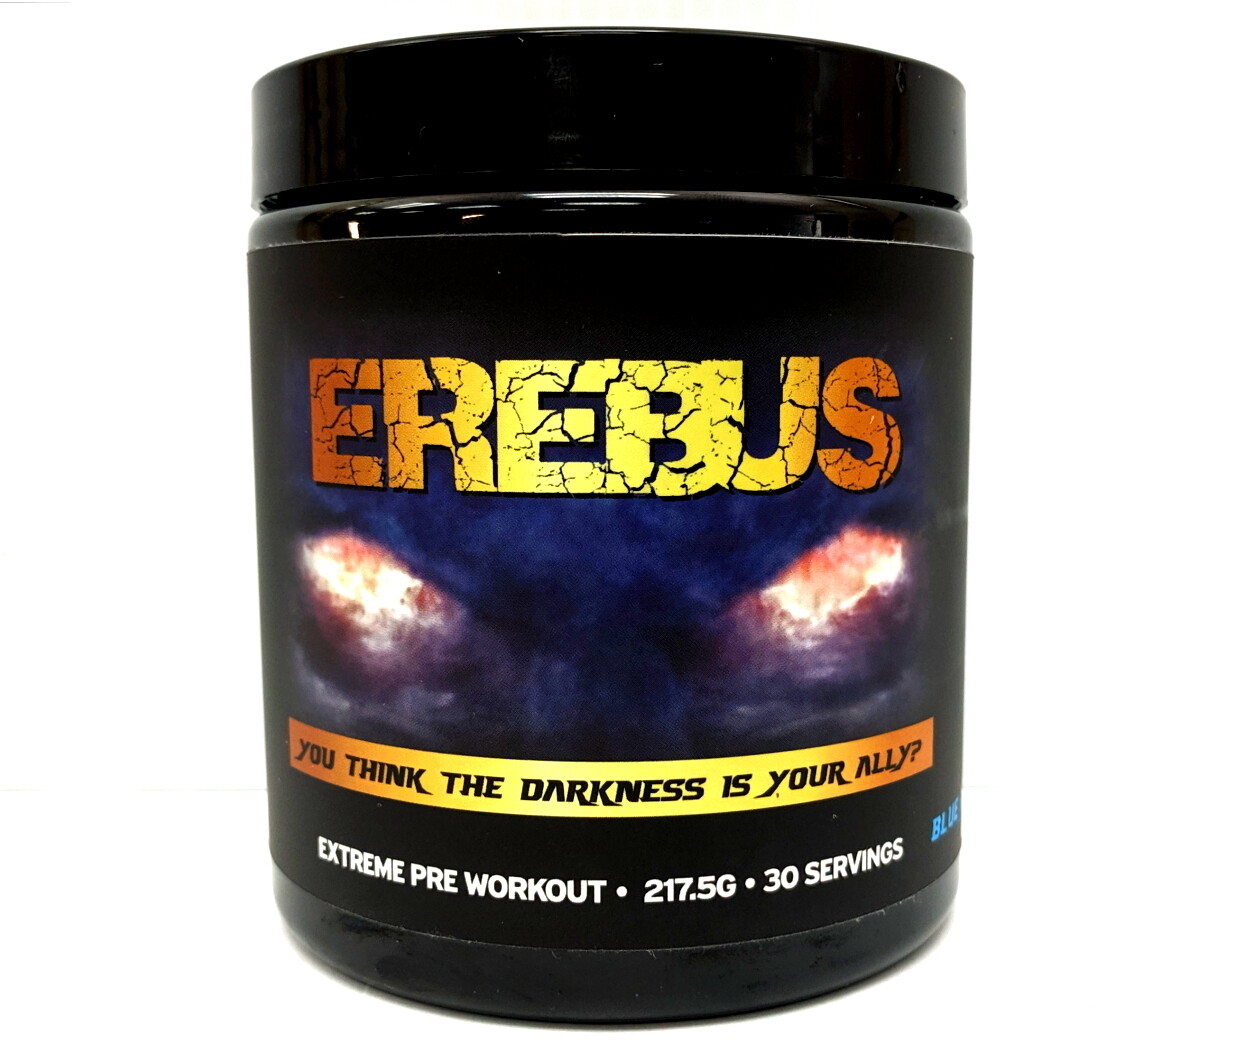 30 Minute Erebus pre workout for Beginner